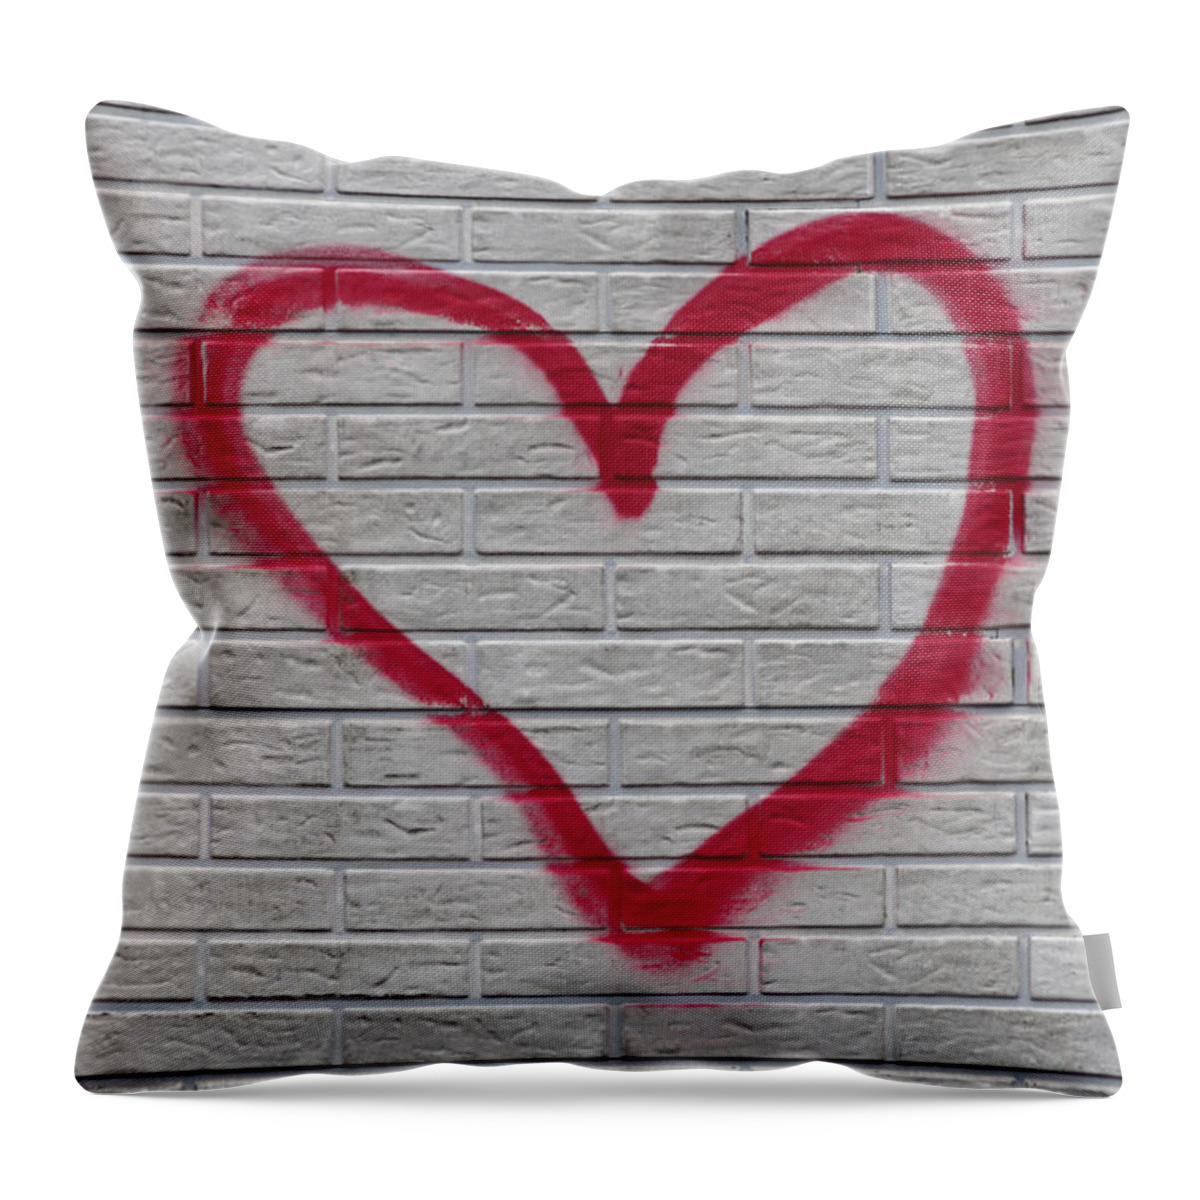 Heart Throw Pillow featuring the photograph Heart by Hartmut Knisel